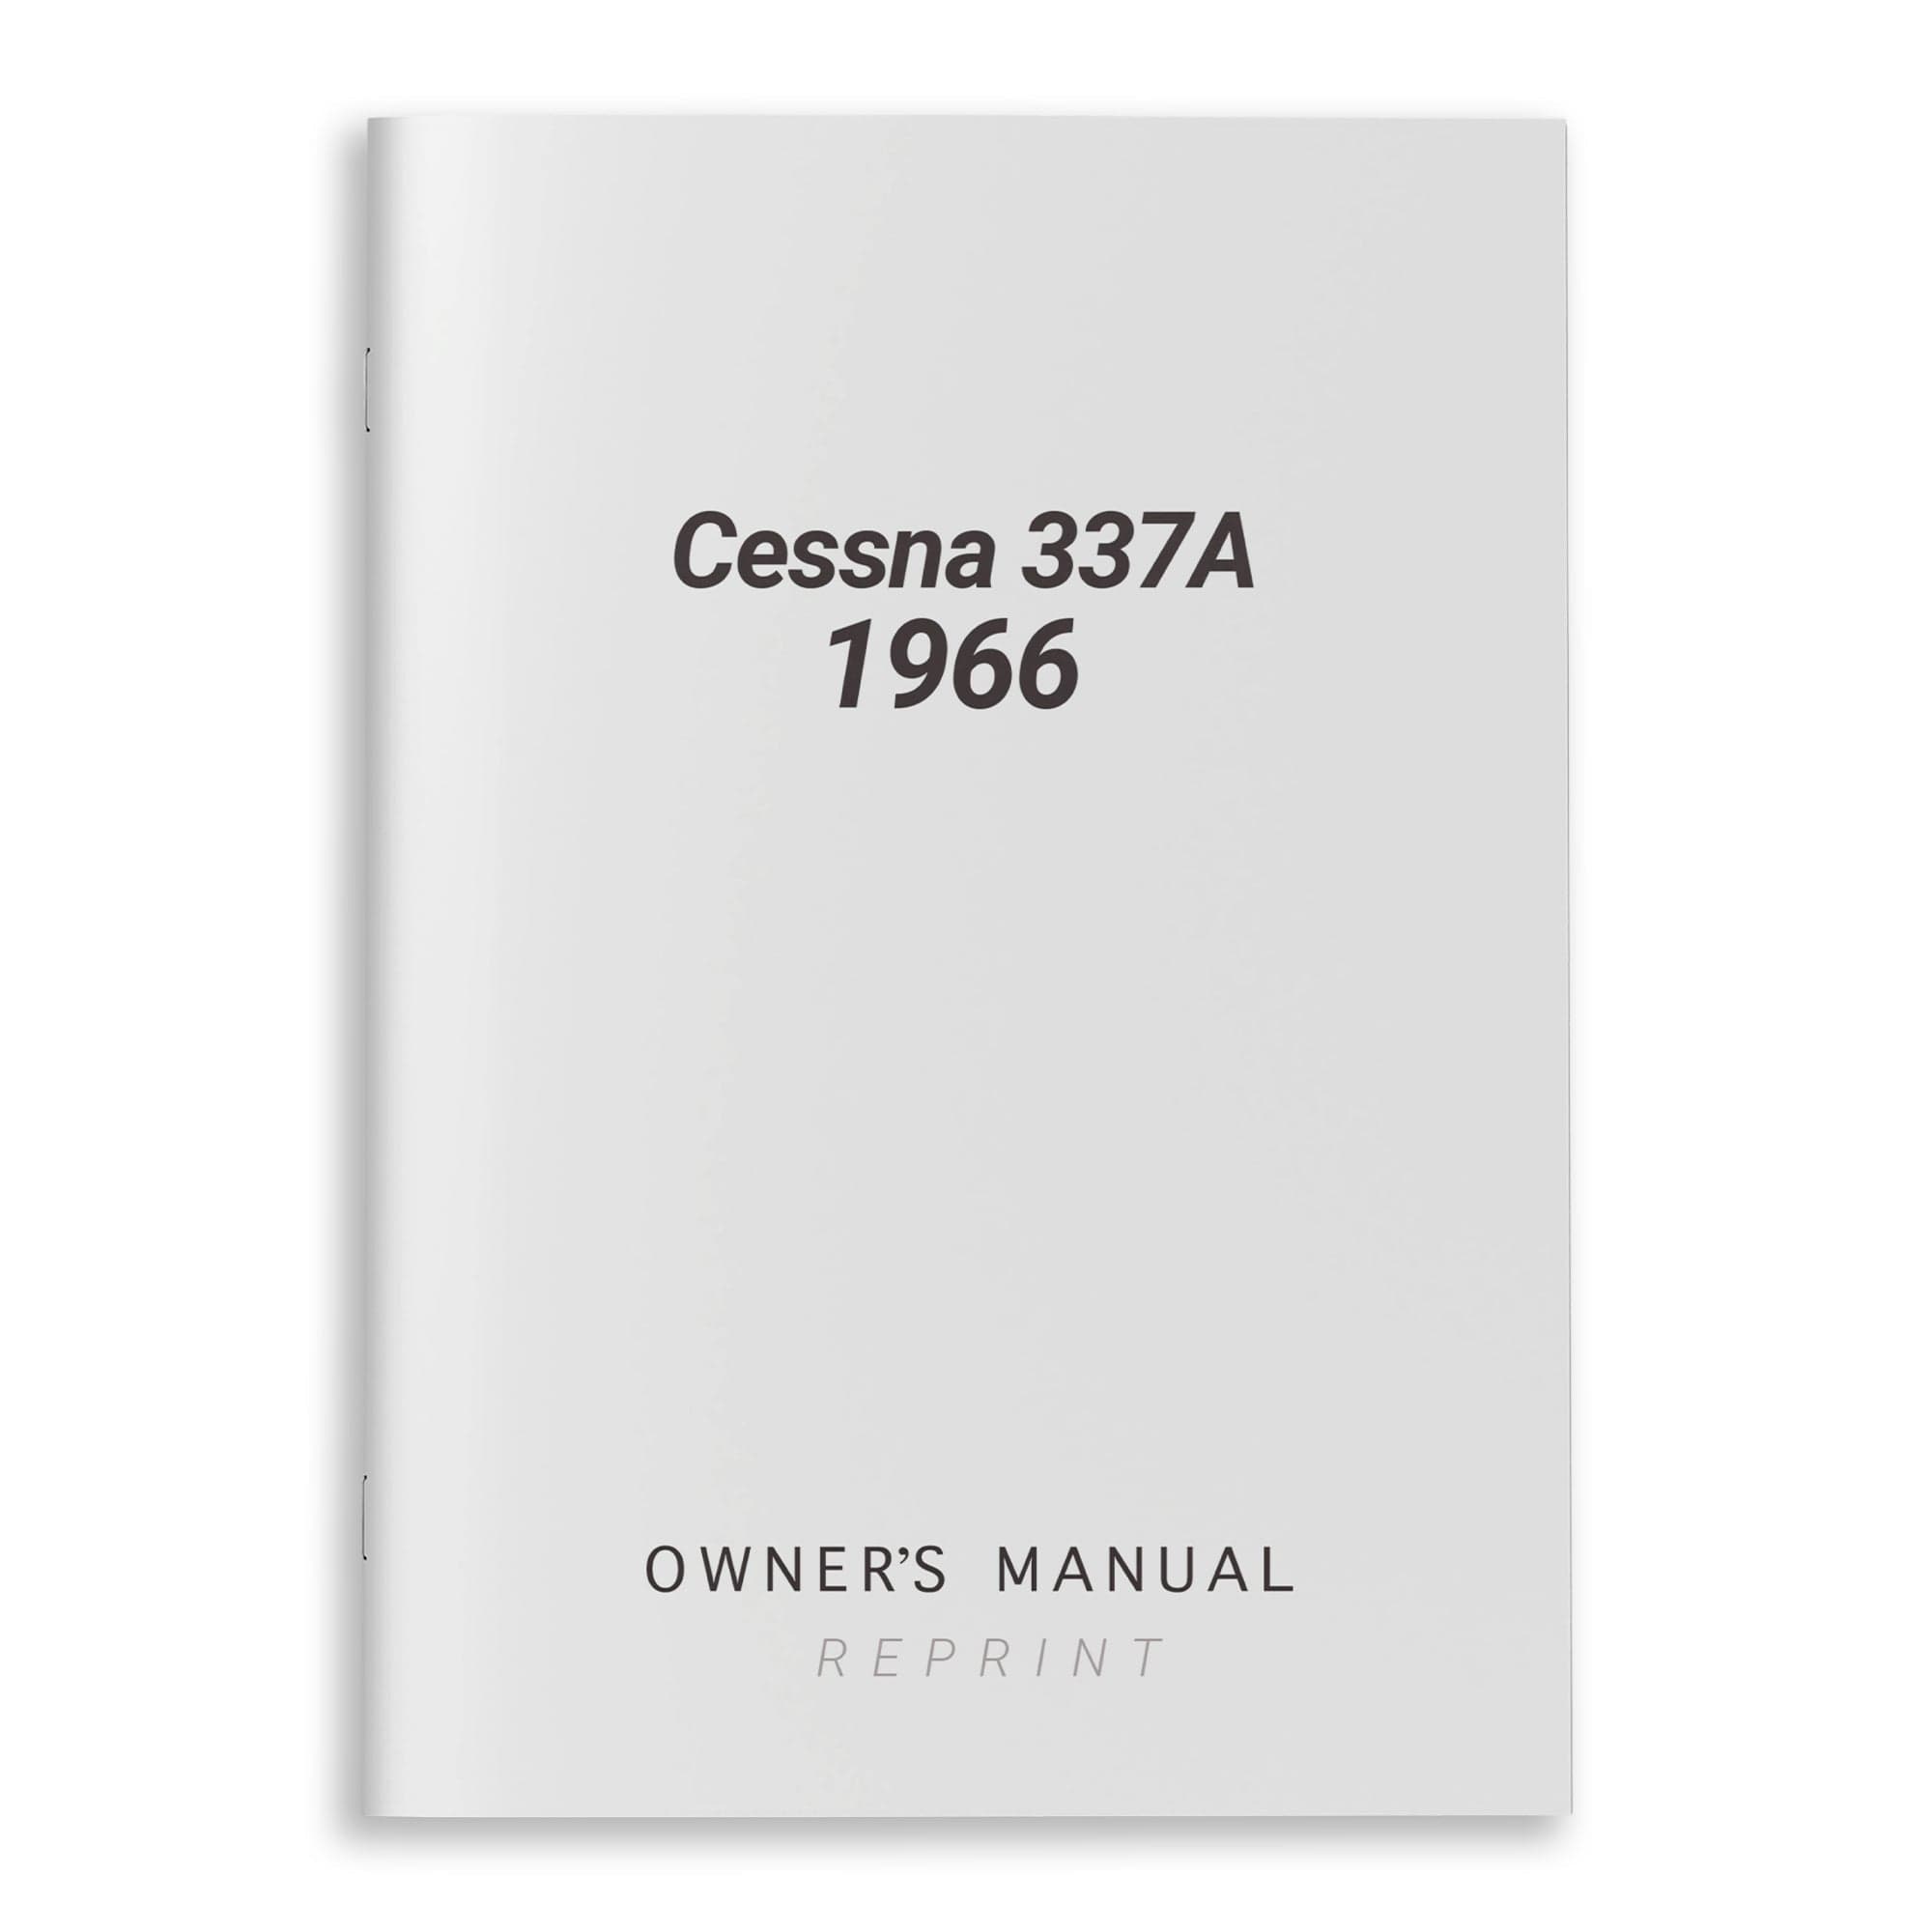 Cessna 337A 1966 Owner's Manual